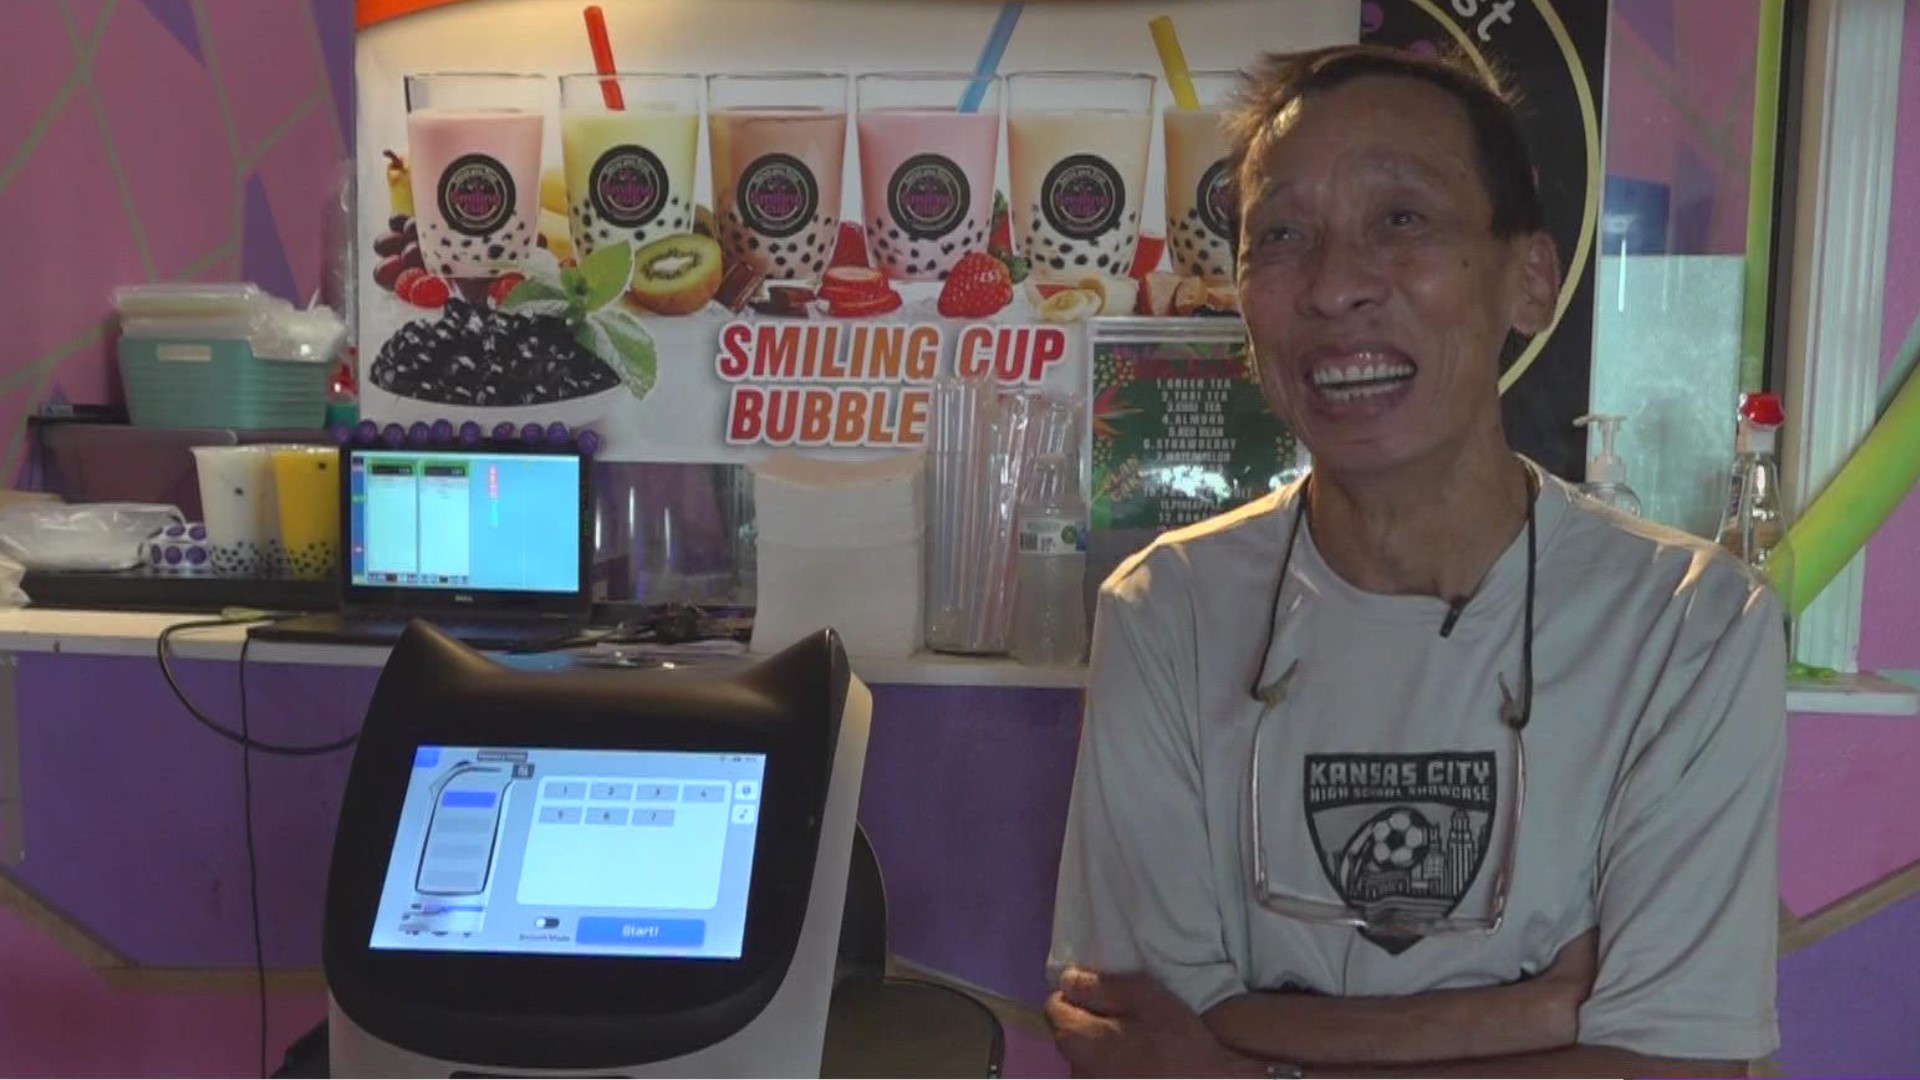 Smiling Cup Bubble Tea introduces the first-ever robot waitress in Fort Smith at their boba shop.